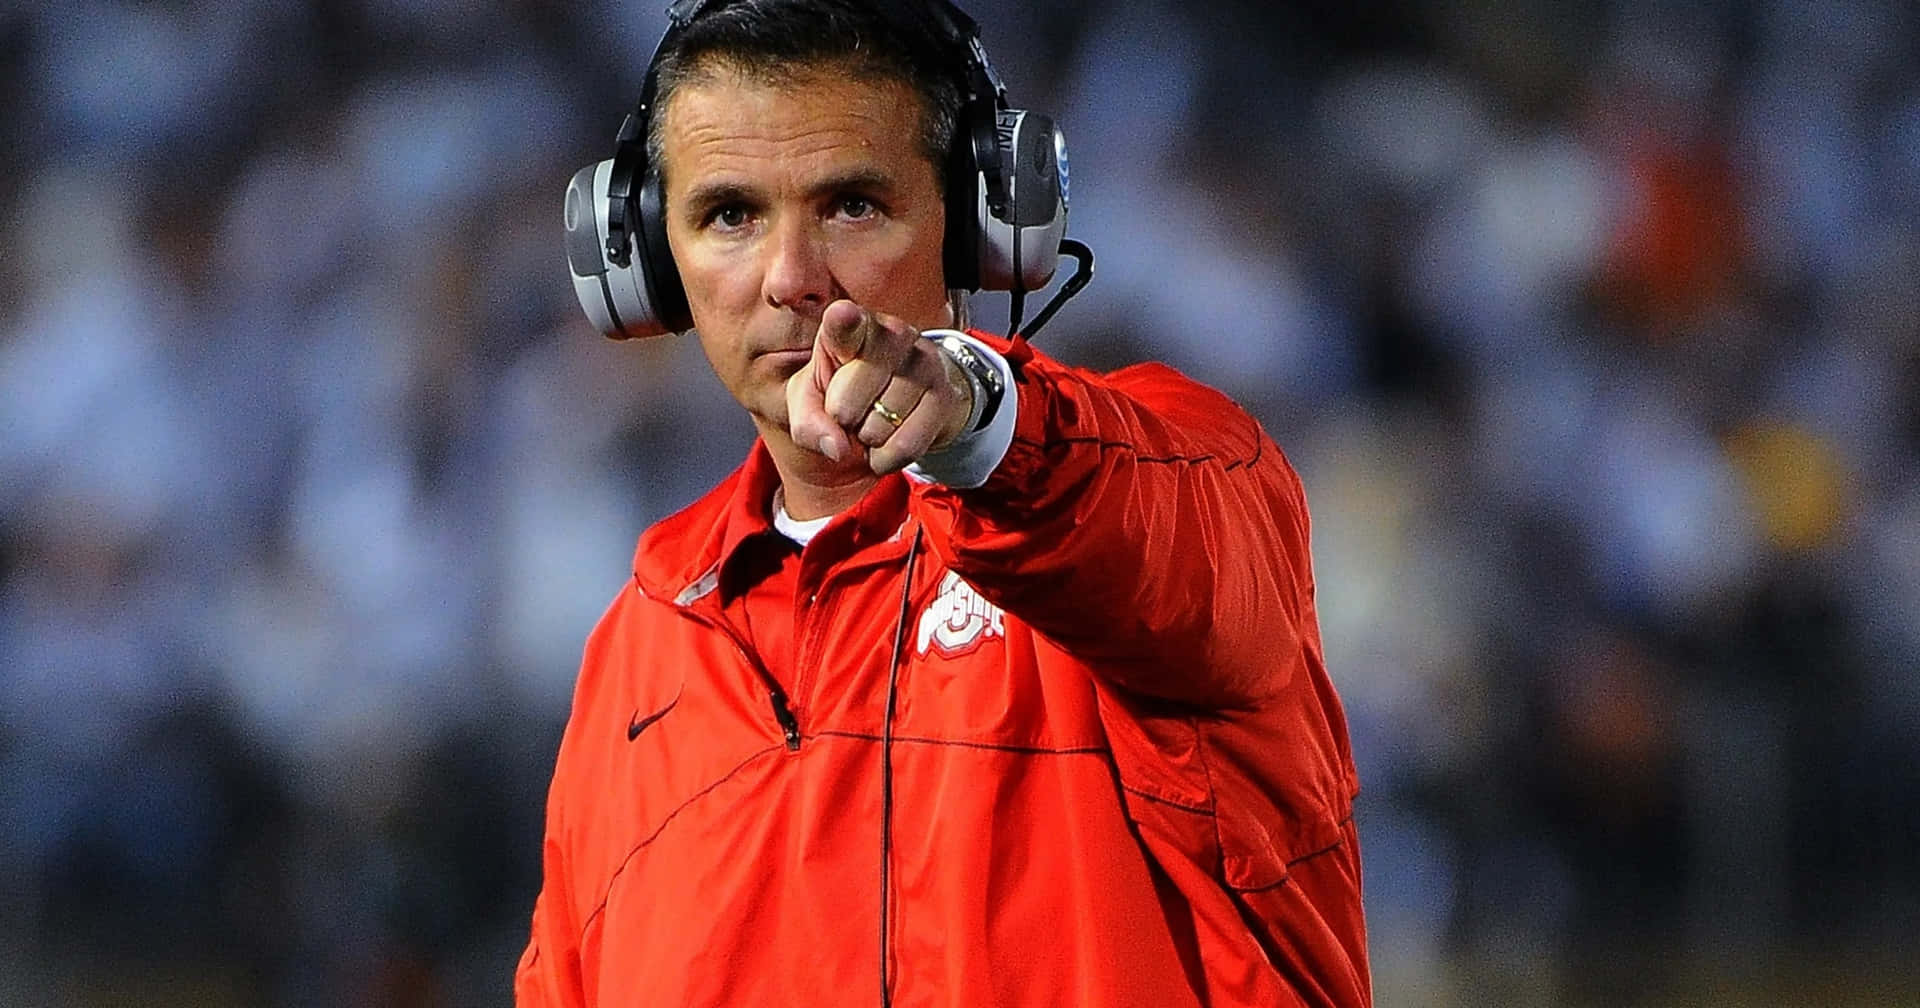 "Ohio State Buckeyes head coached by Urban Meyer"